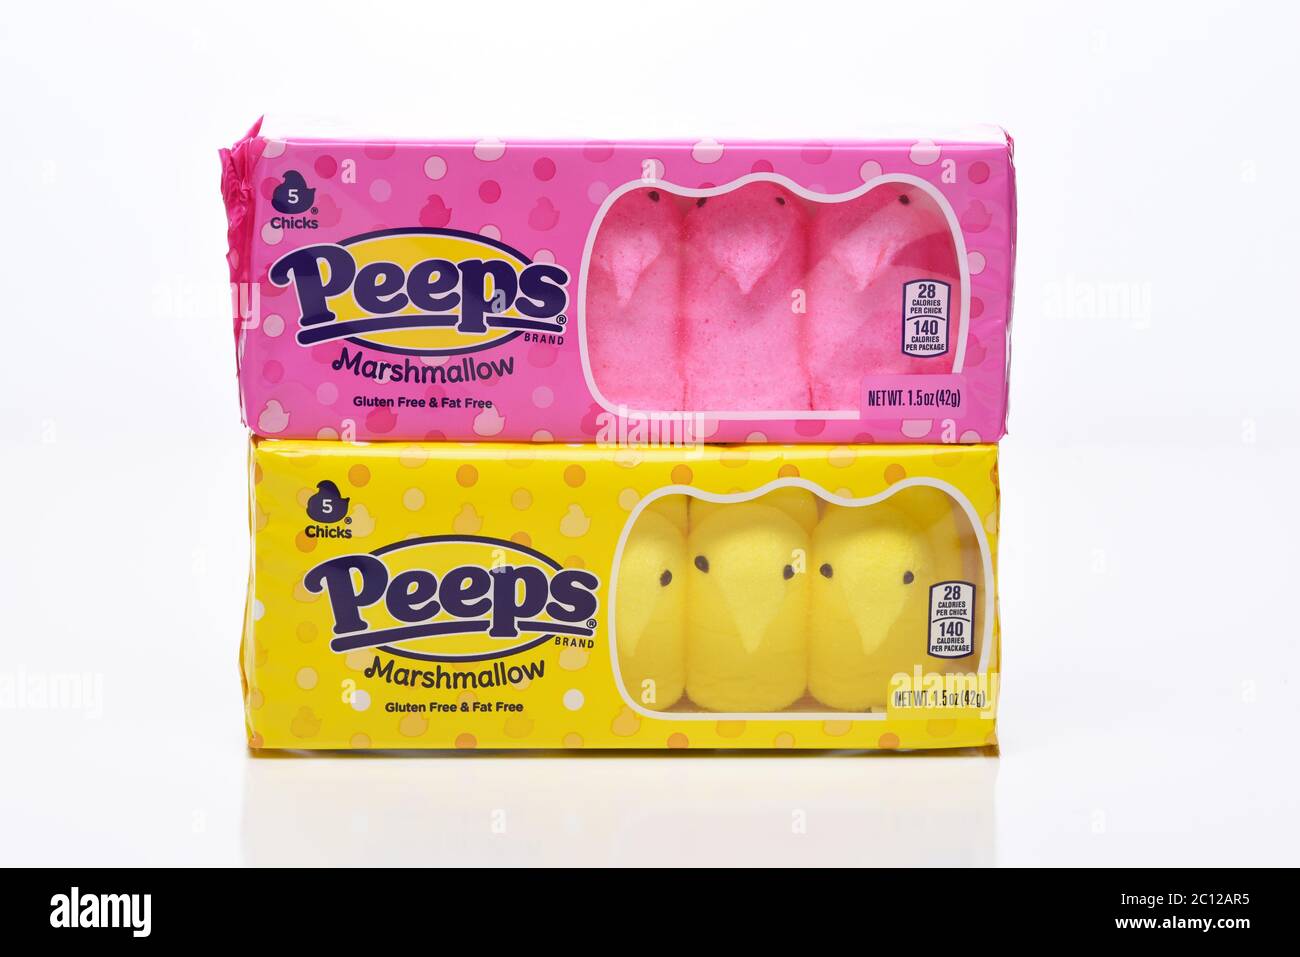 IRVINE, CALIFORNIA - 20 APRIL 2020: Two Packages of Peeps Marshmallow Chicks for Easter, Yellow and Pink Varieties. Stock Photo